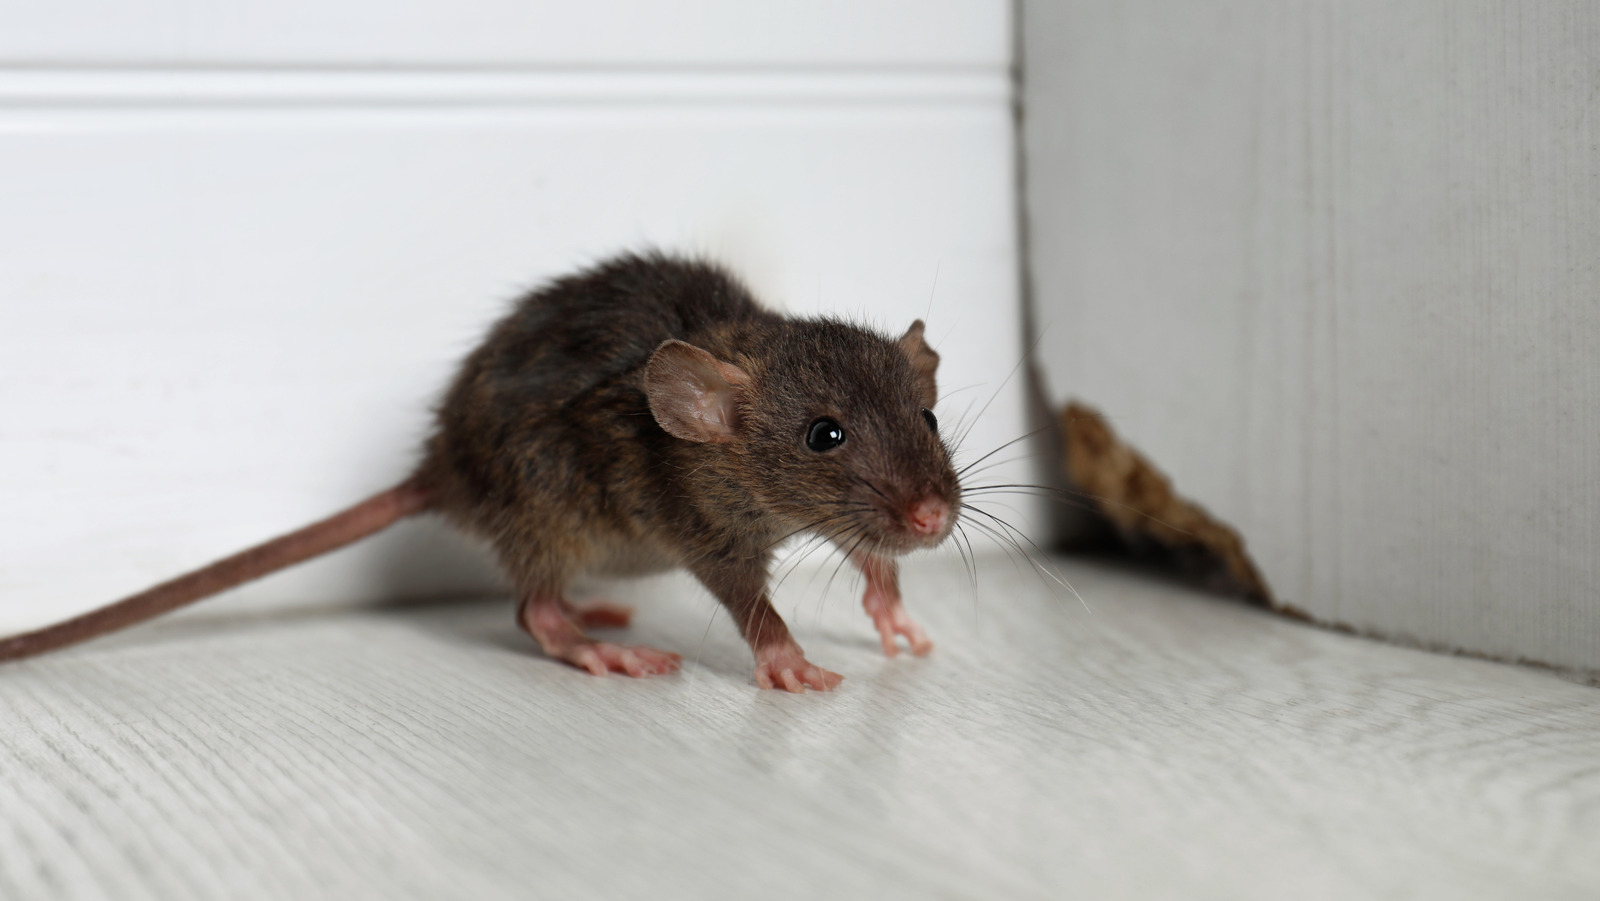 How to Help Get Rid of Mice in the Kitchen